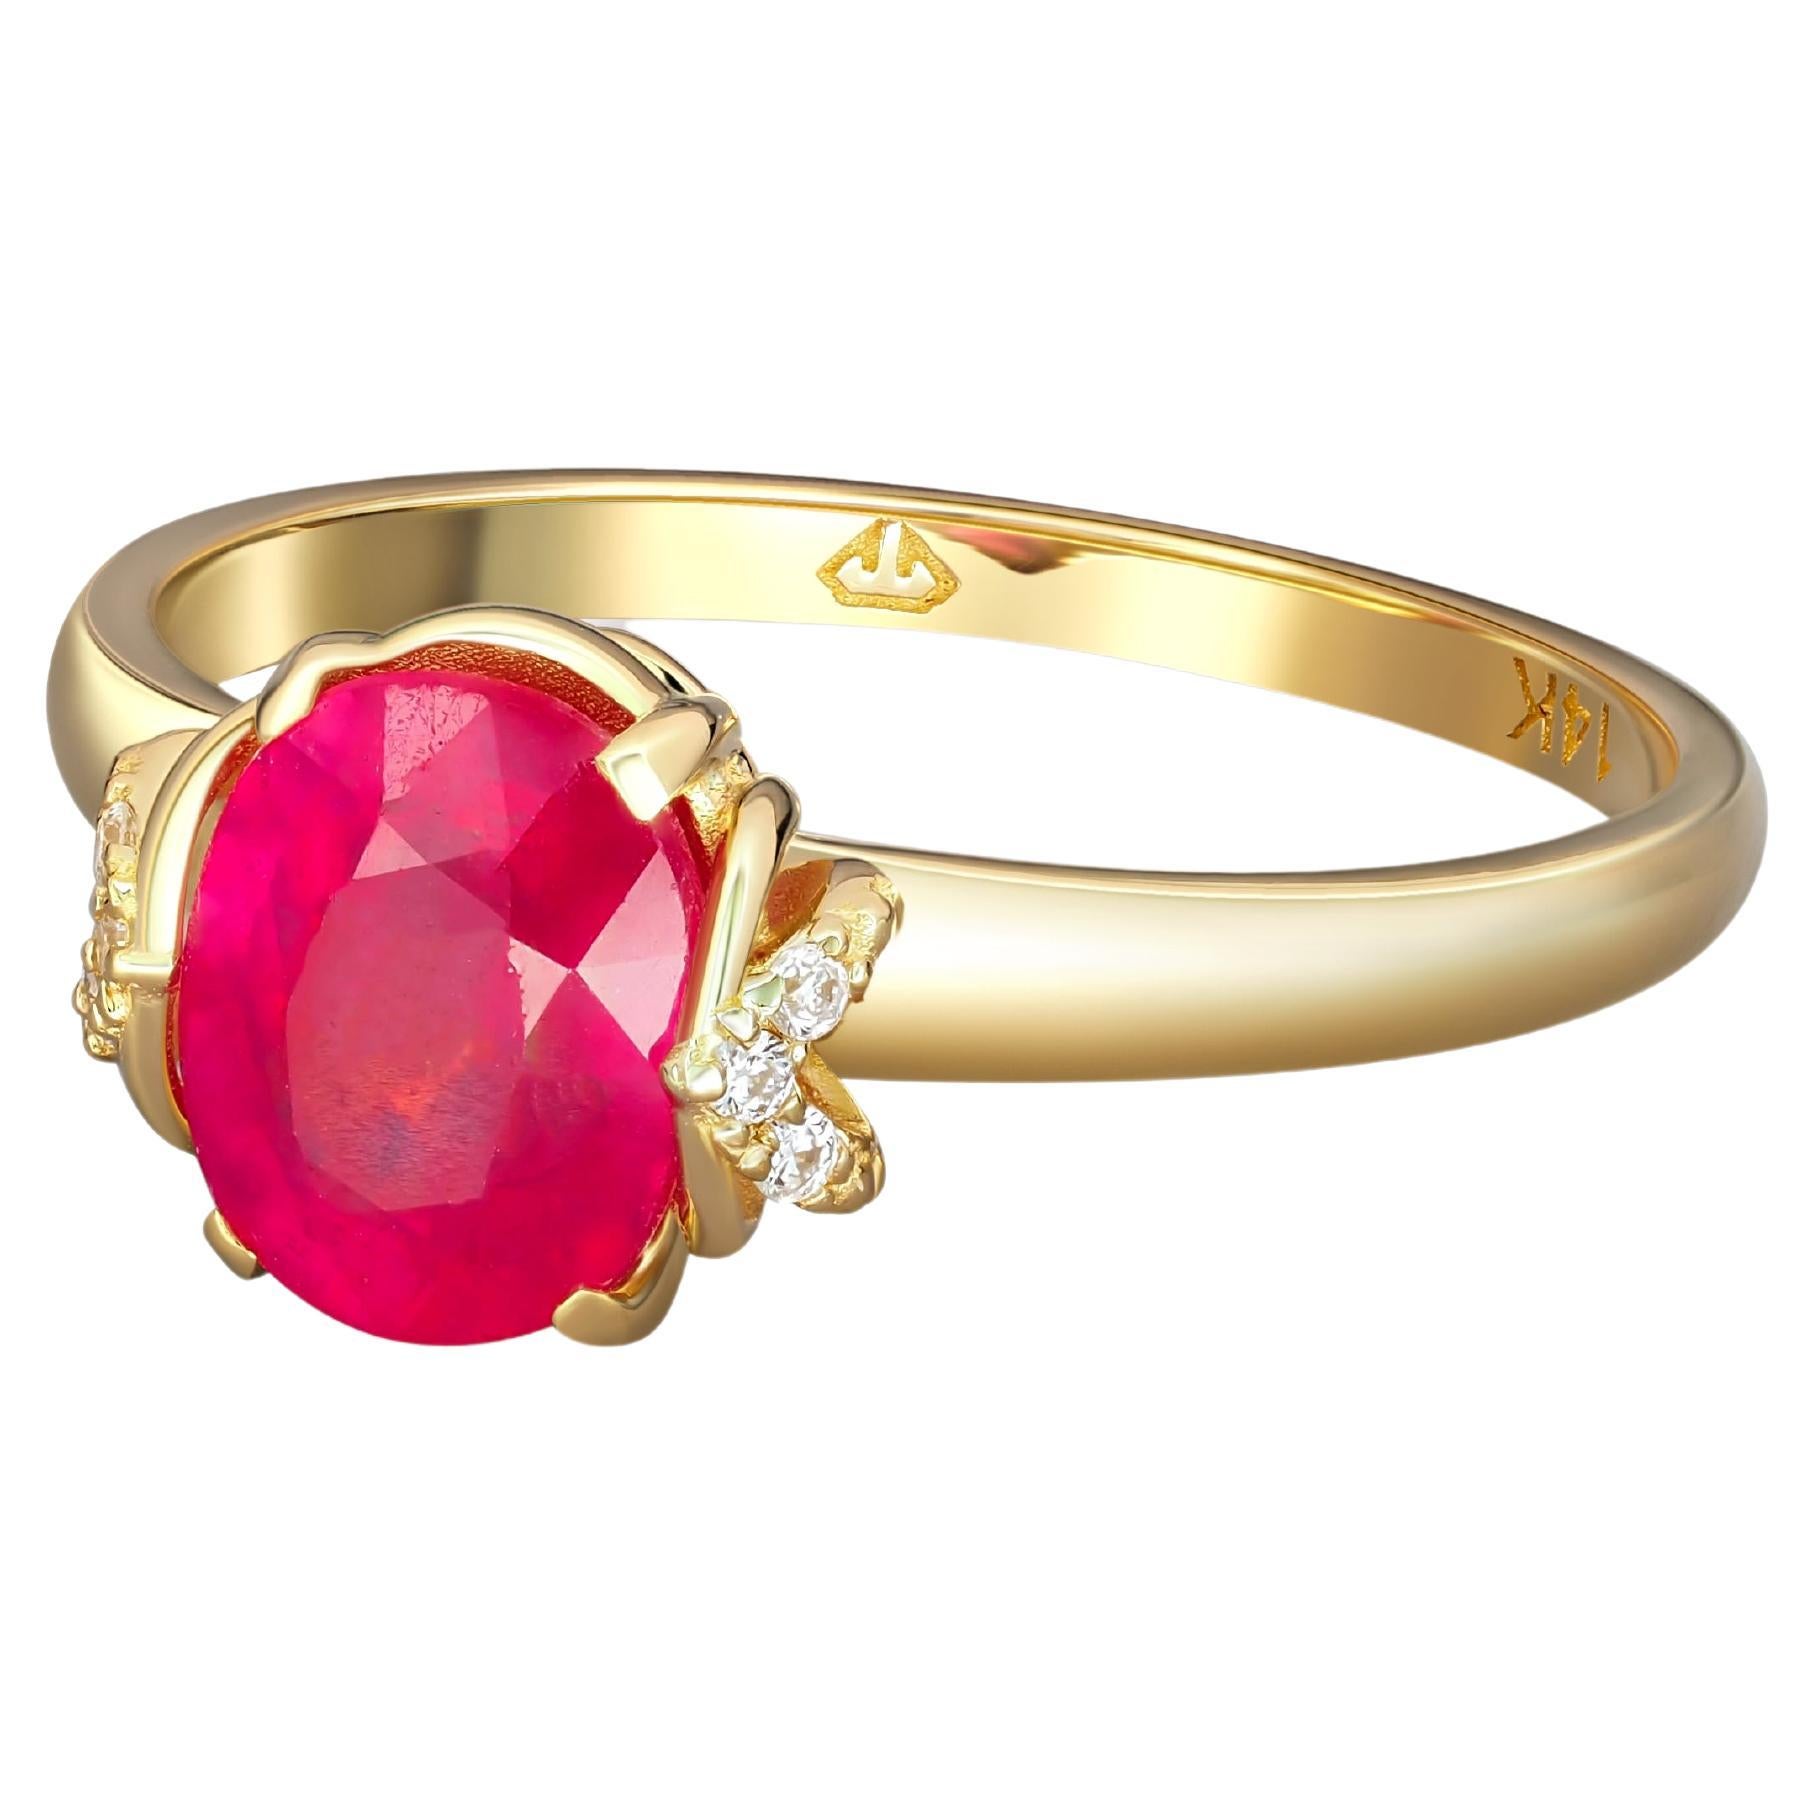 14 Karat Gold Ring with Ruby and Diamonds. Oval ruby ring!